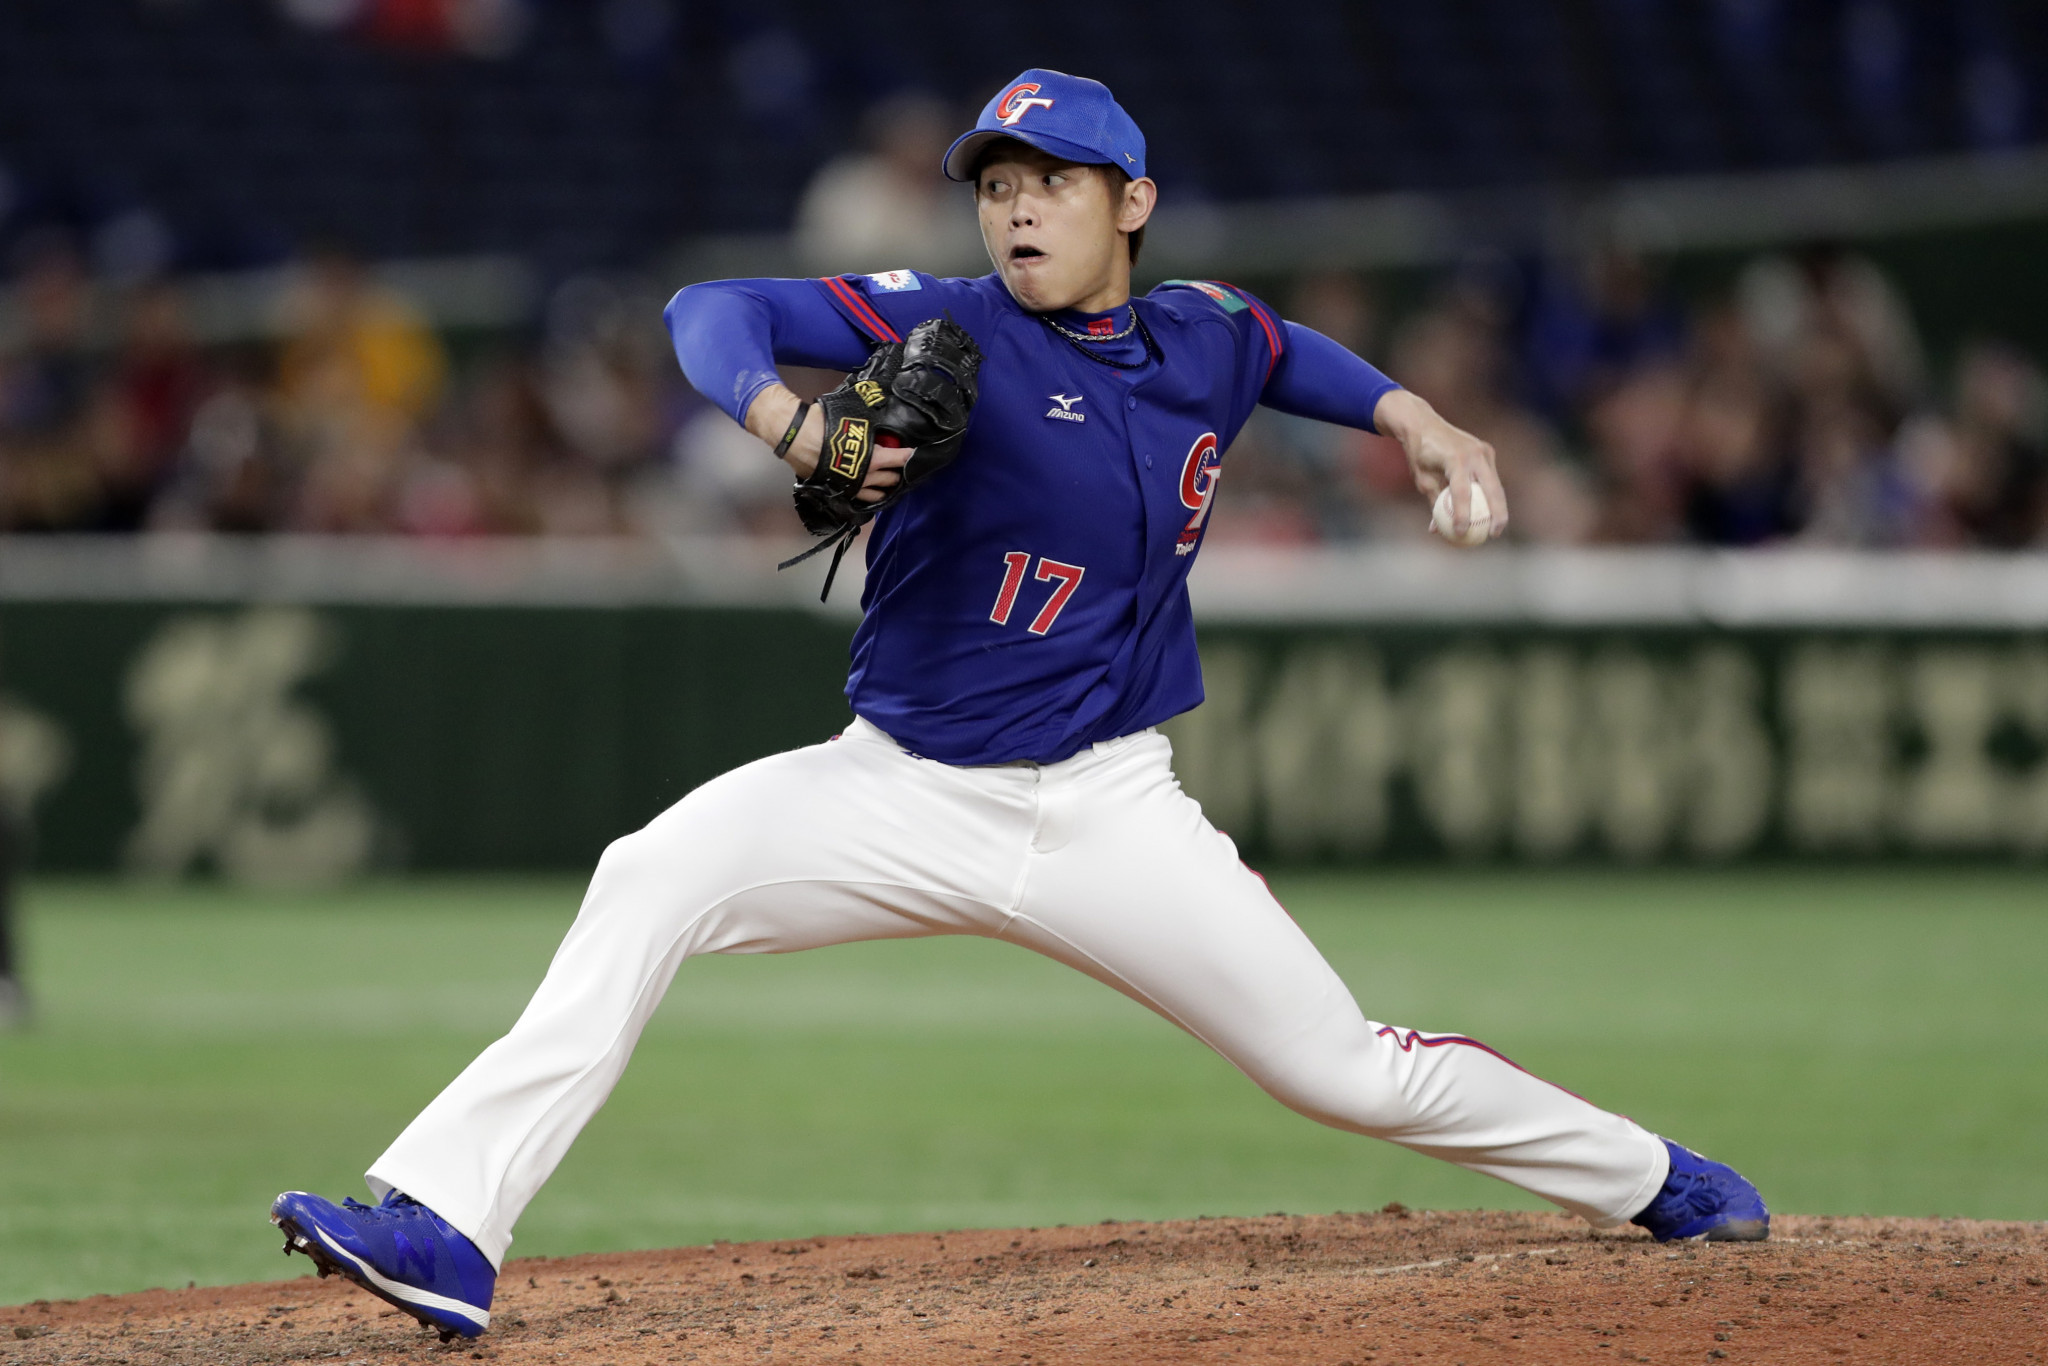 Chinese Taipei will be the host of the last-chance world qualifier, offering the final spot in the Tokyo 2020 baseball tournament ©Getty Images